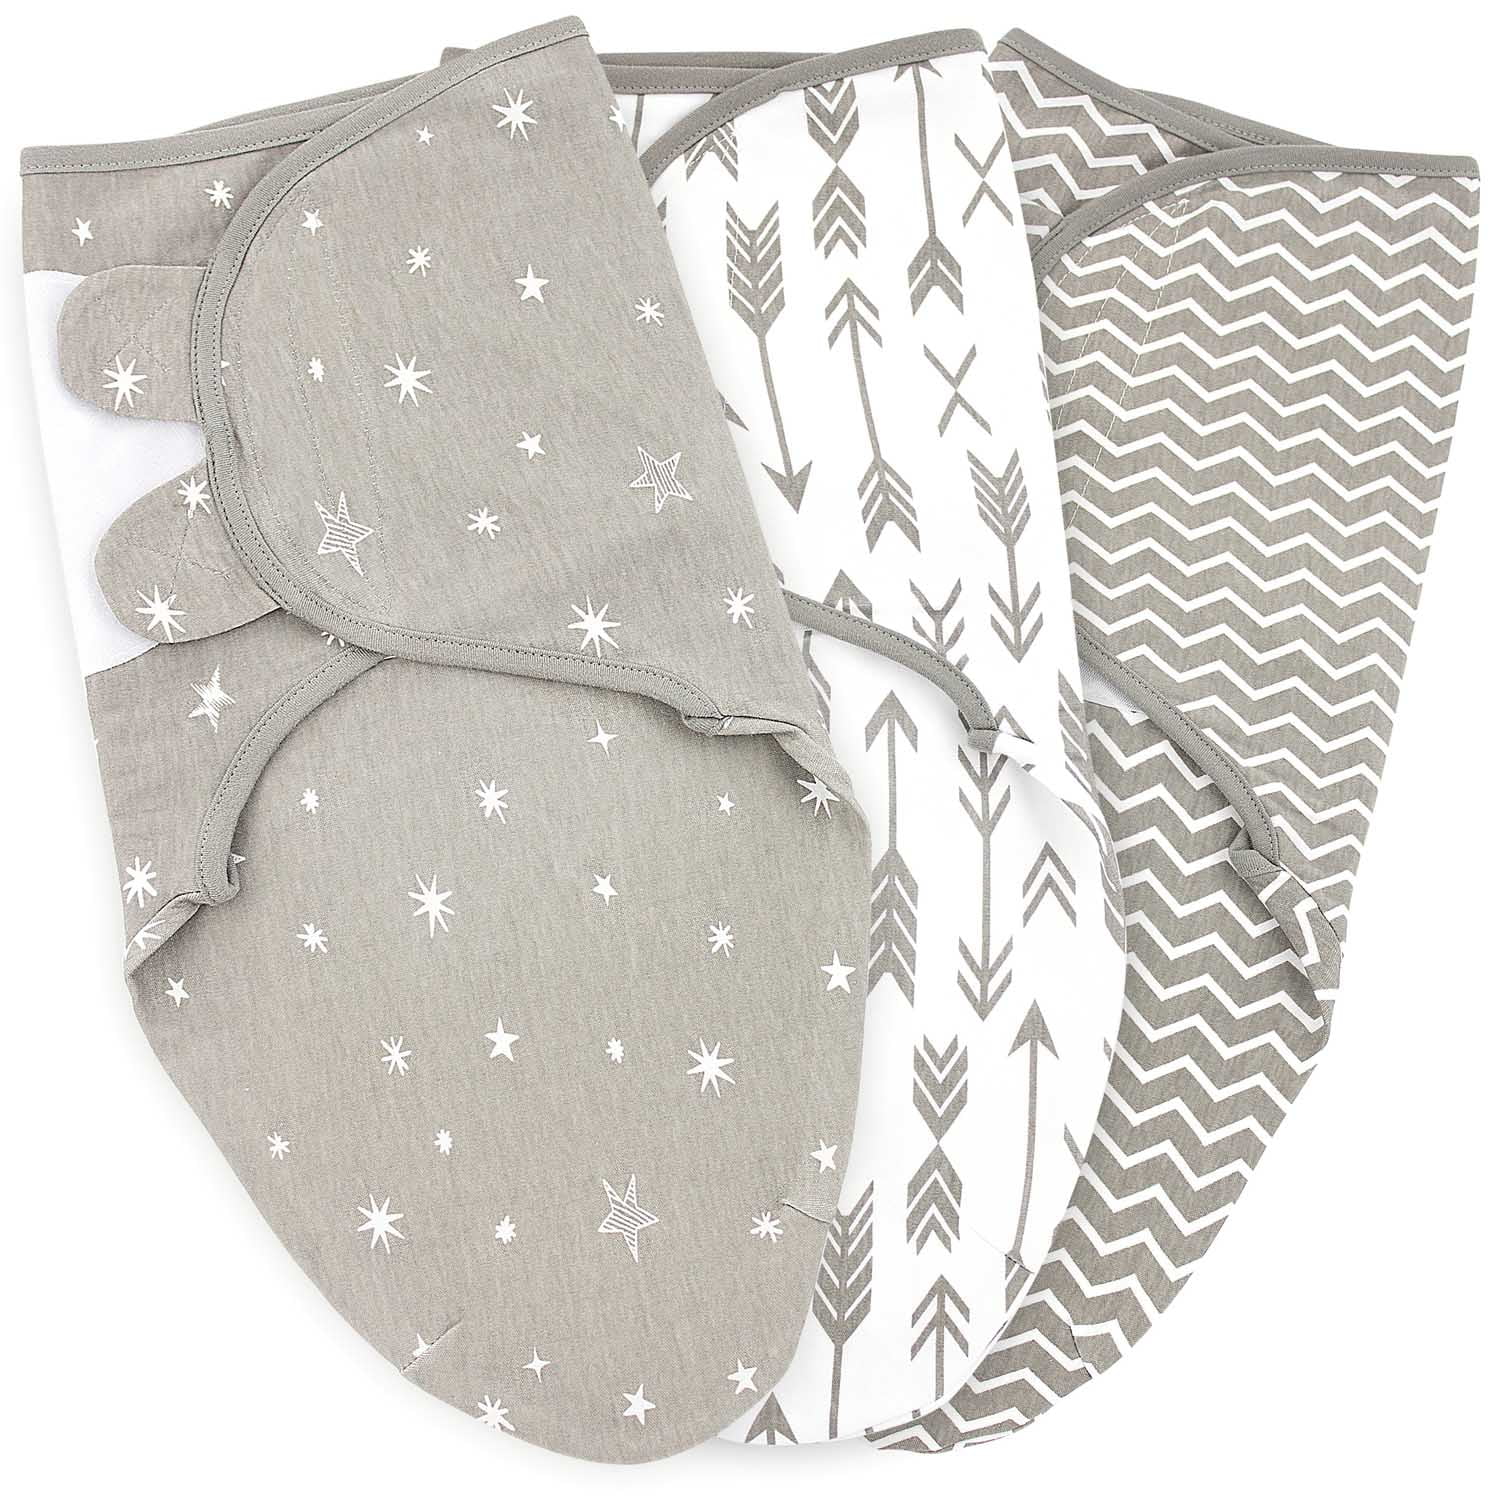 Baby Swaddle Blanket Wrap for Newborn & Infant 0-3 Months 100% Breathable Cotton Swaddlers Sleep Sack with Adjustable Wings Grey 3 Pack Swaddling Blankets for Boys and Girls